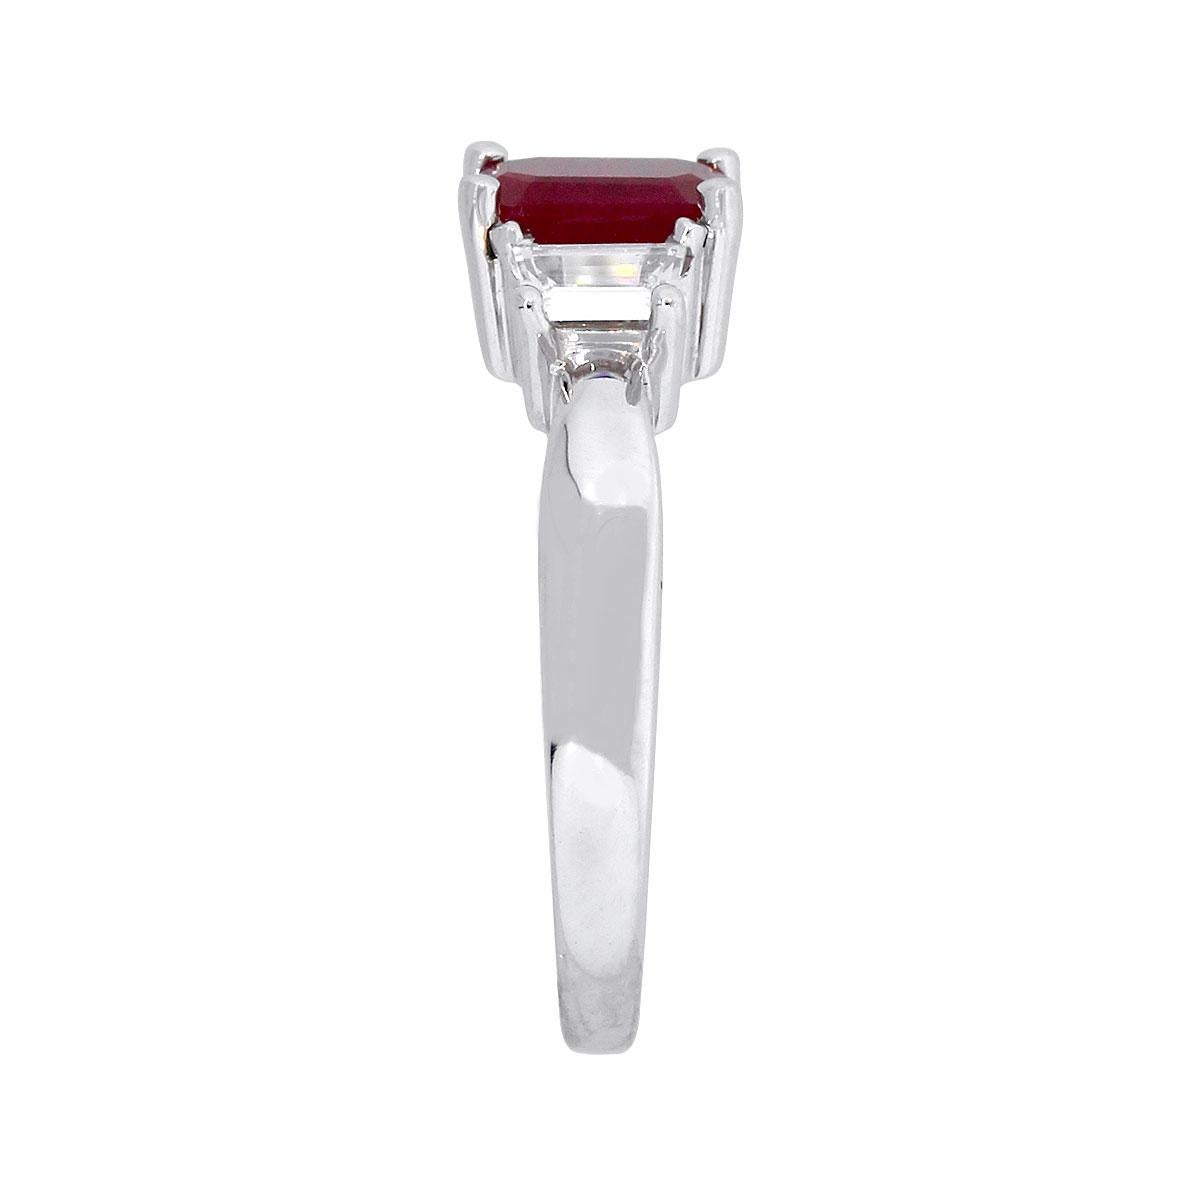 Material: 18k White Gold
Ruby Details: Approx. 1.20ct of emerald cut ruby.
Adjacent Diamond Details: Approx. 0.37ctw trapezoid cut diamonds. Diamonds are G/H in color and VVS in clarity.
Ring Size: 7
Total Weight: 5.1g (3.3dwt)
Ring Measurements: